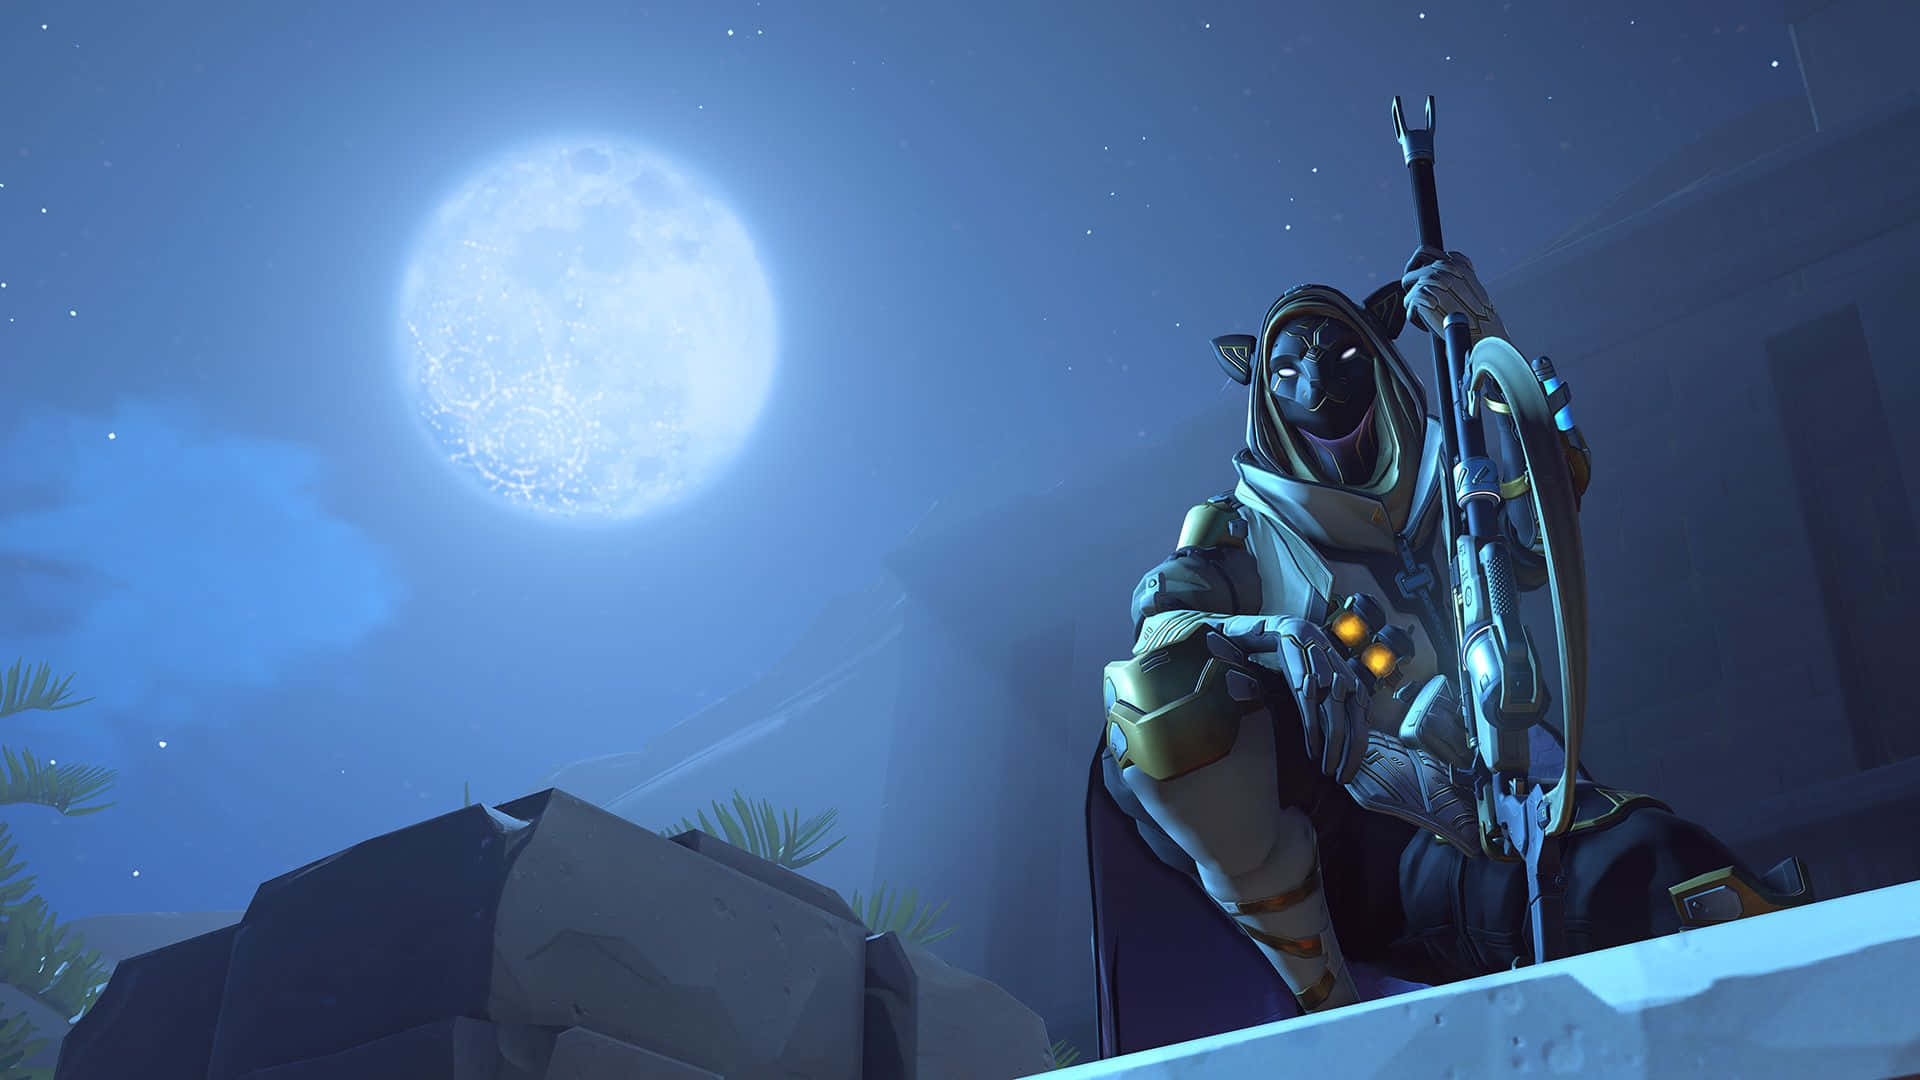 Overwatch's Ana, the skilled sniper, focuses on her target. Wallpaper